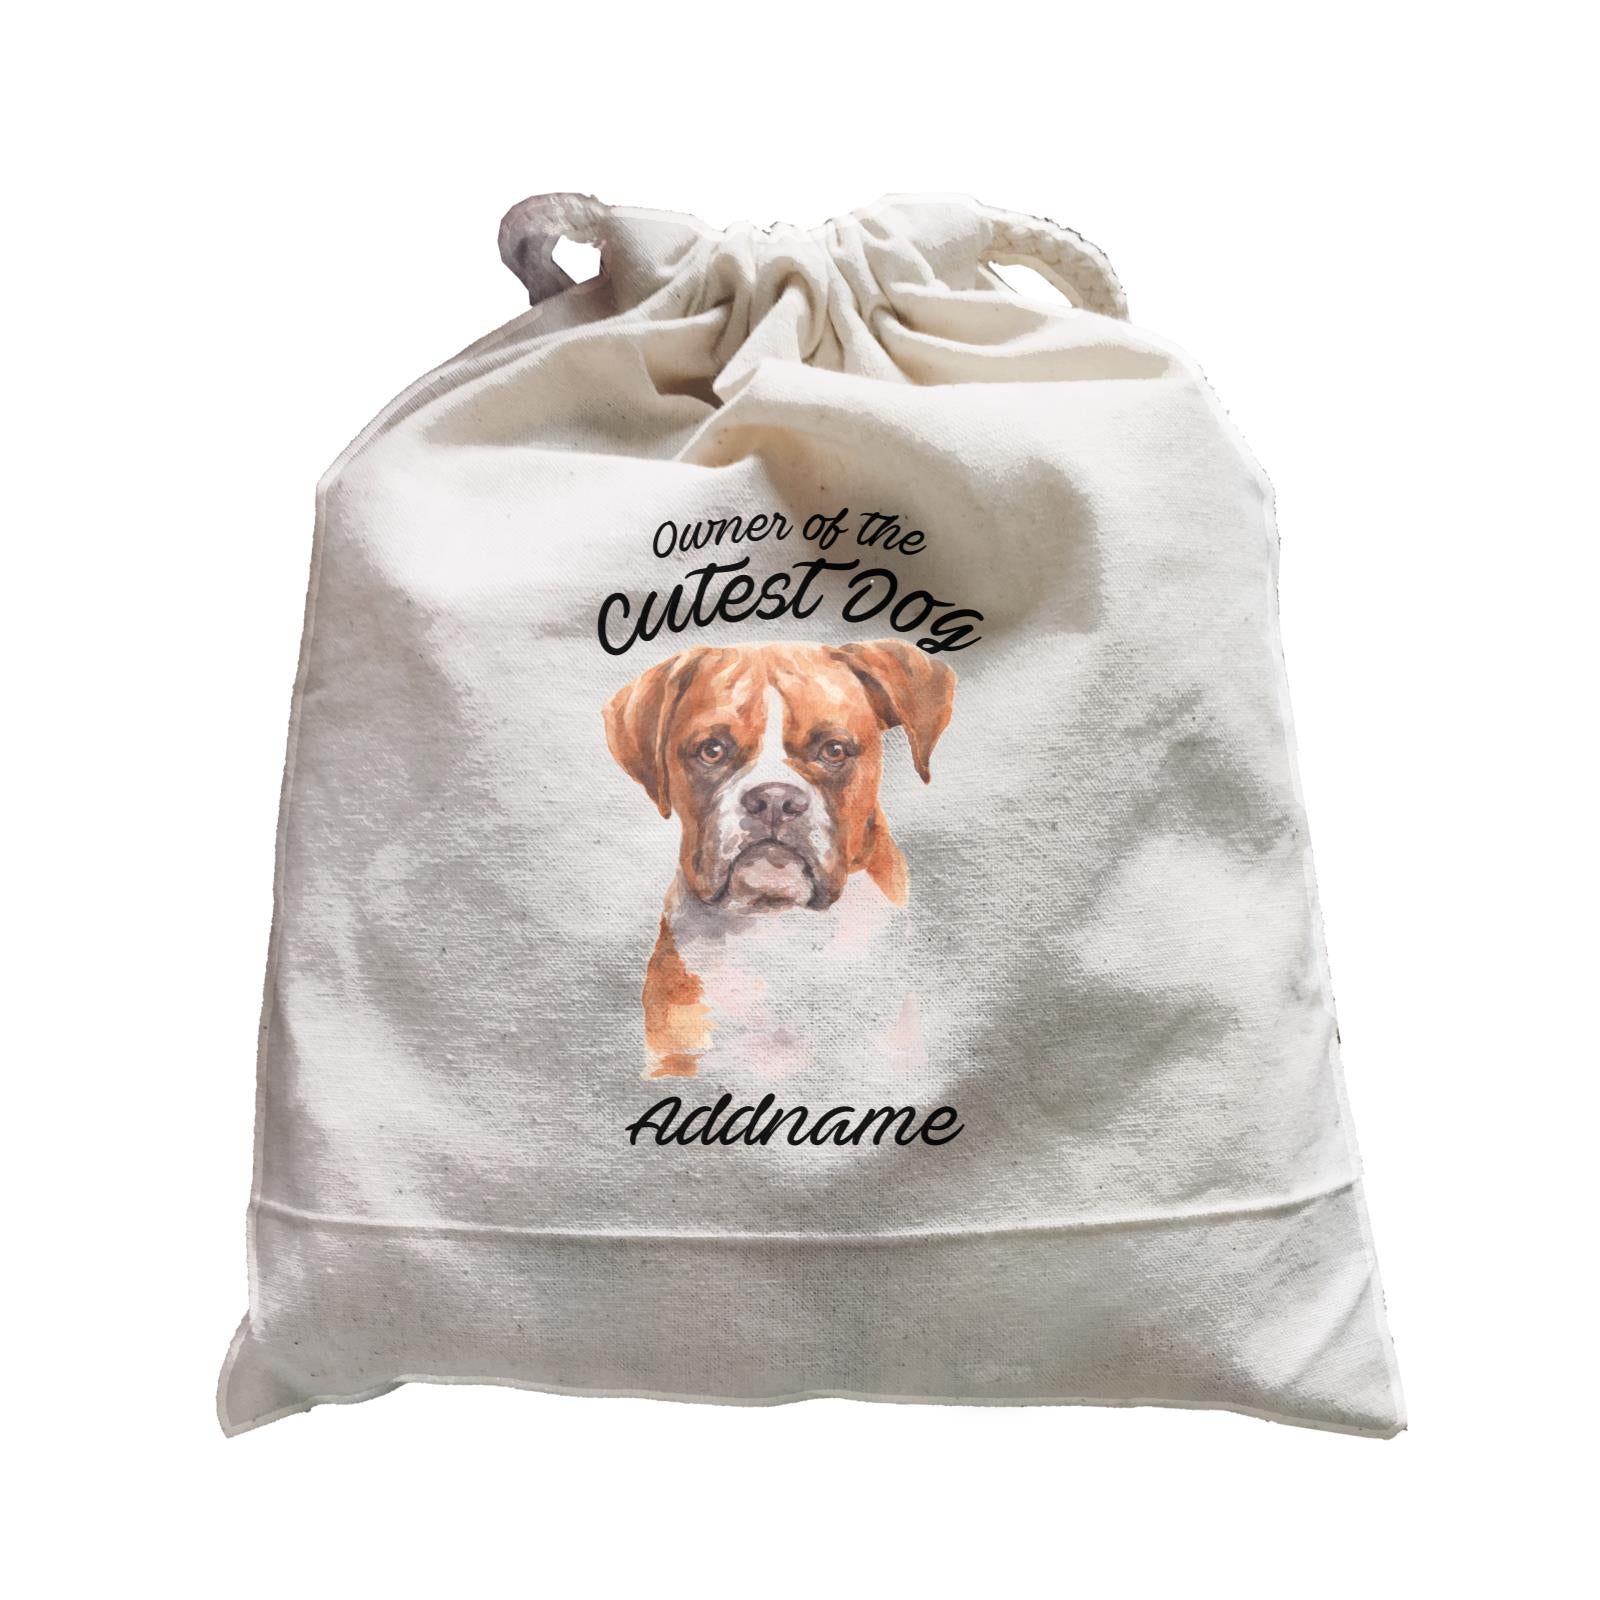 Watercolor Dog Owner Of The Cutest Dog Boxer Brown Ears Addname Satchel